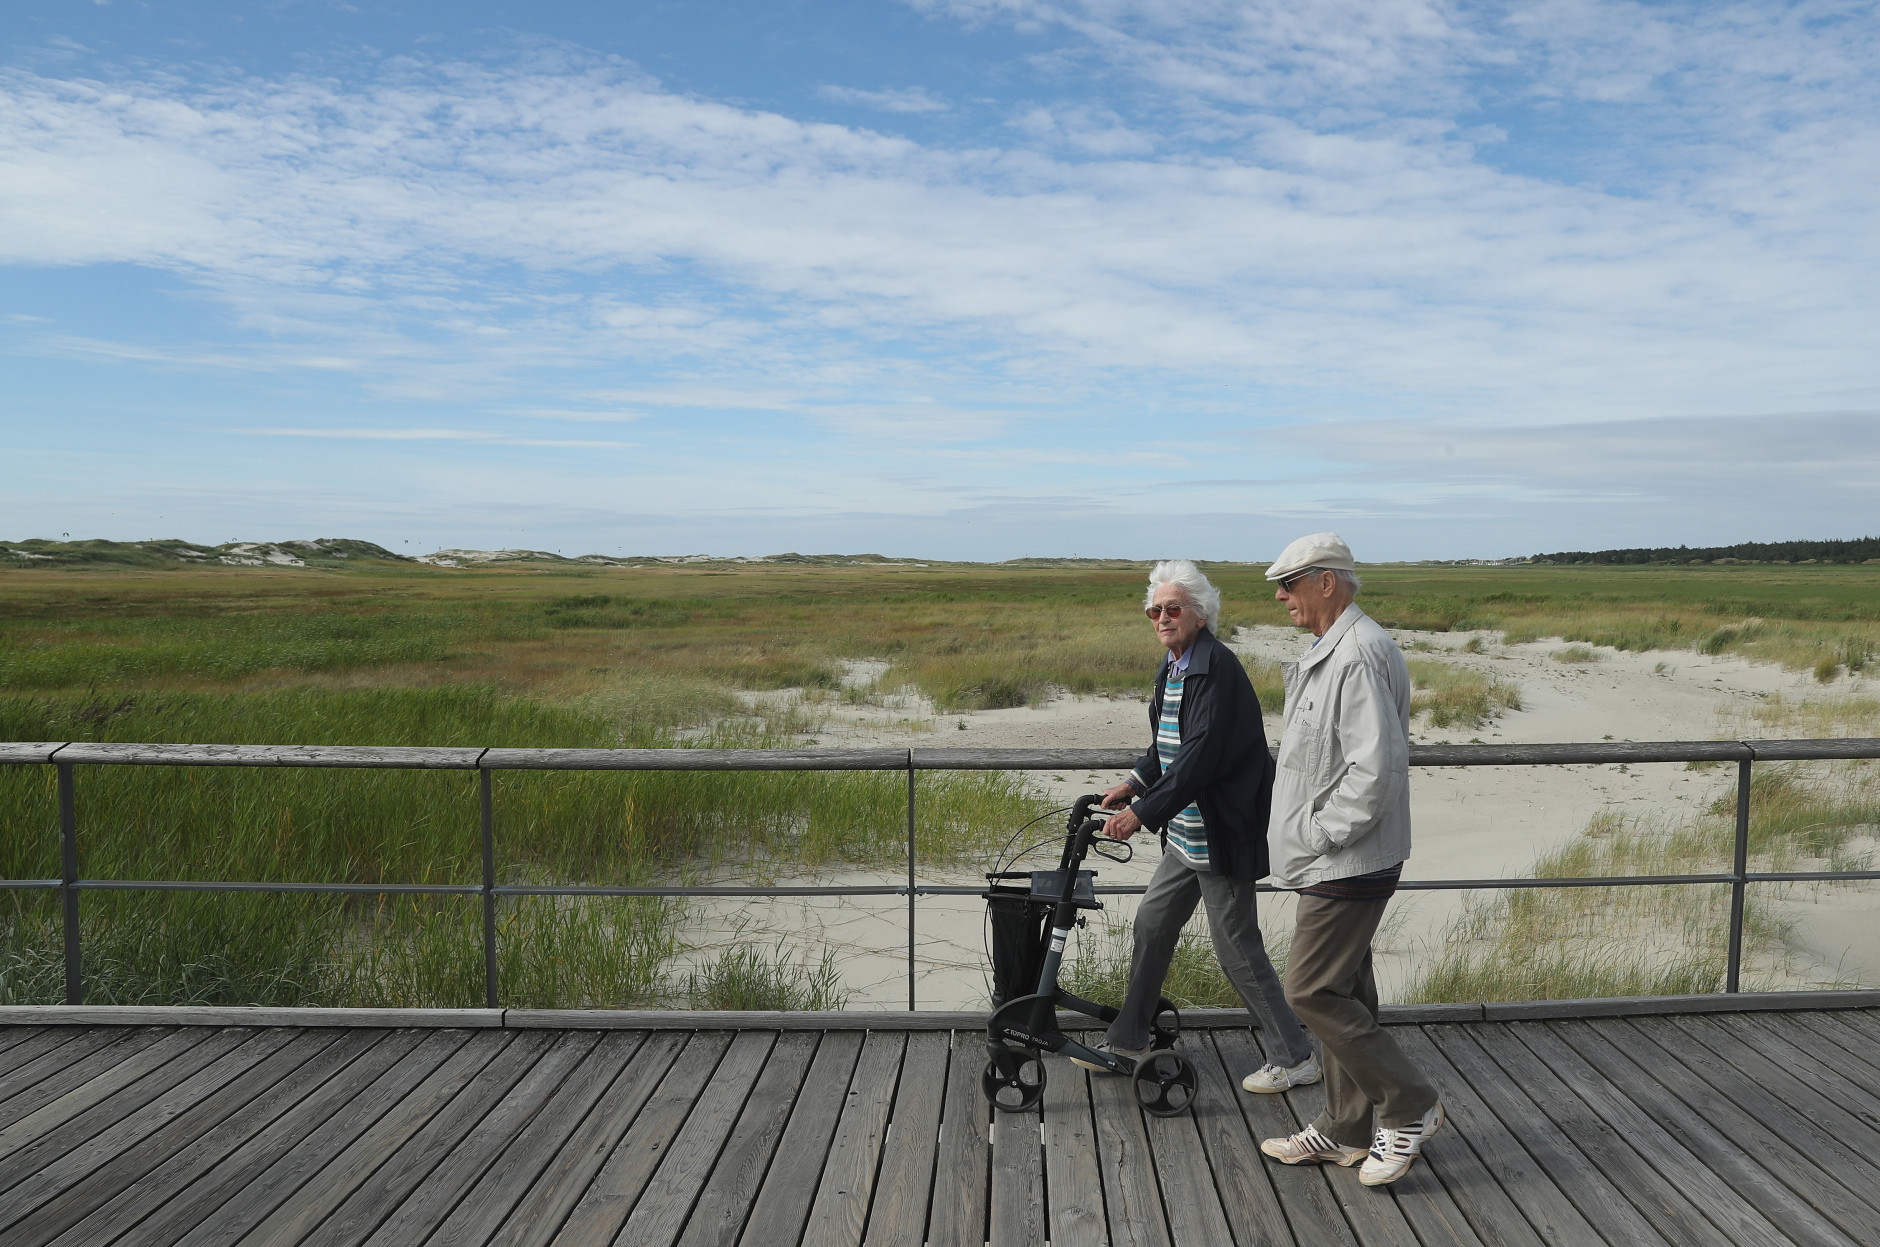 ST PETER-ORDING, GERMANY - JULY 18:  An elderly couple, who said they did not mind being photographed, walk along a wooden walkway that crosses protected dunes and salt marshes on July 18, 2016 at Sankt-Peter-Ording, Germany. Sankt-Peter-Ording is among the top destinations for vacationers along Germany's North Sea coast. Many Germans, unsettled by the recent terror attacks in countries like France and Turkey, are choosing to vacation in Germany this summer.  (Photo by Sean Gallup/Getty Images)